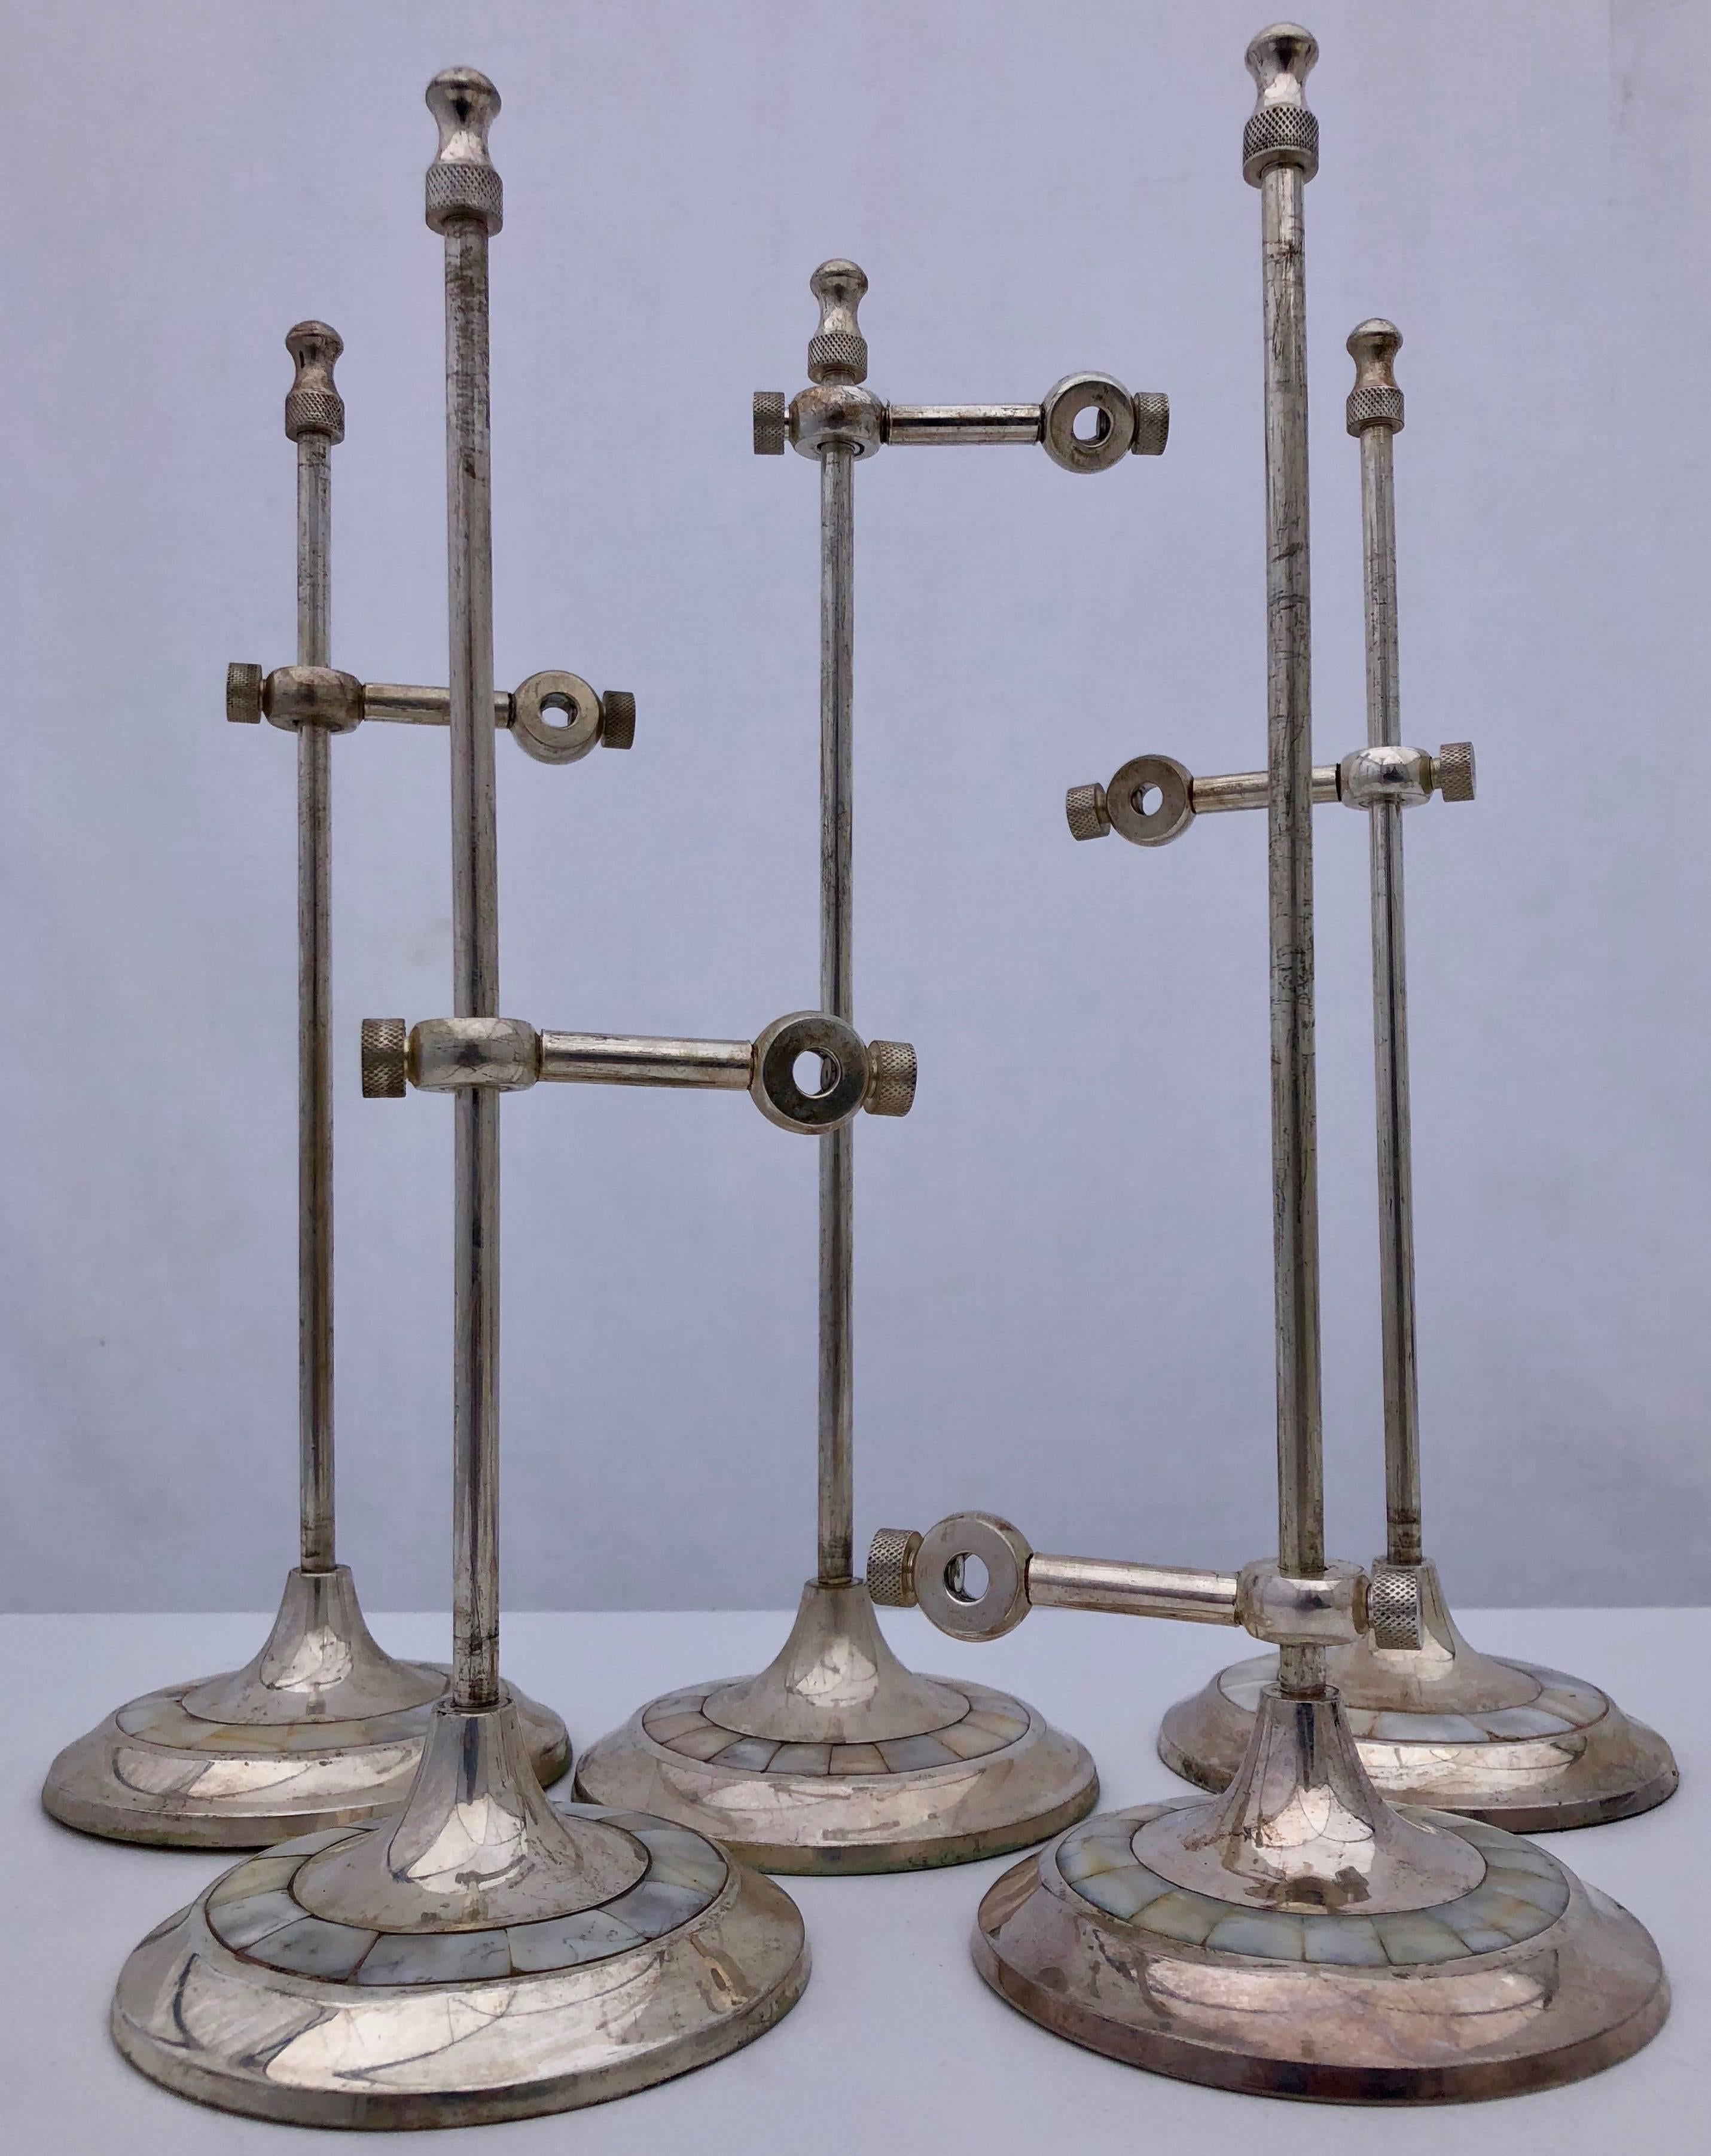 This set of five French antique silver plated tabletop sign holders have a mother of pearl inlay design on the base and are loaded with weight to keep them upright even when holding a heavier sign. They were previously used in a French hotel bar,